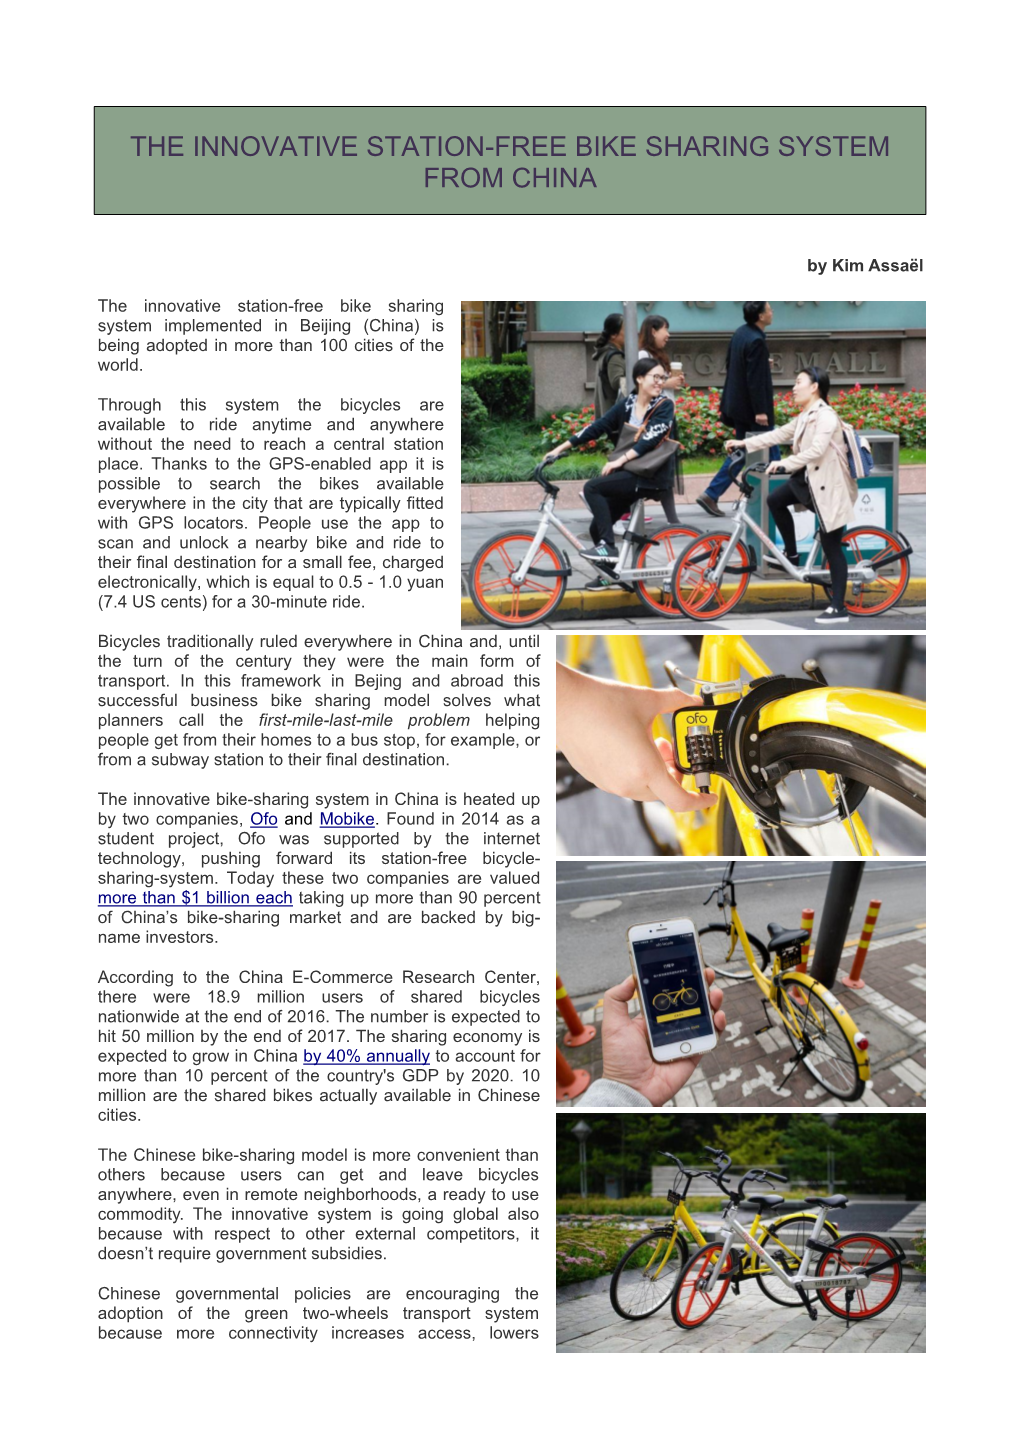 The Innovative Station-Free Bike Sharing System from China